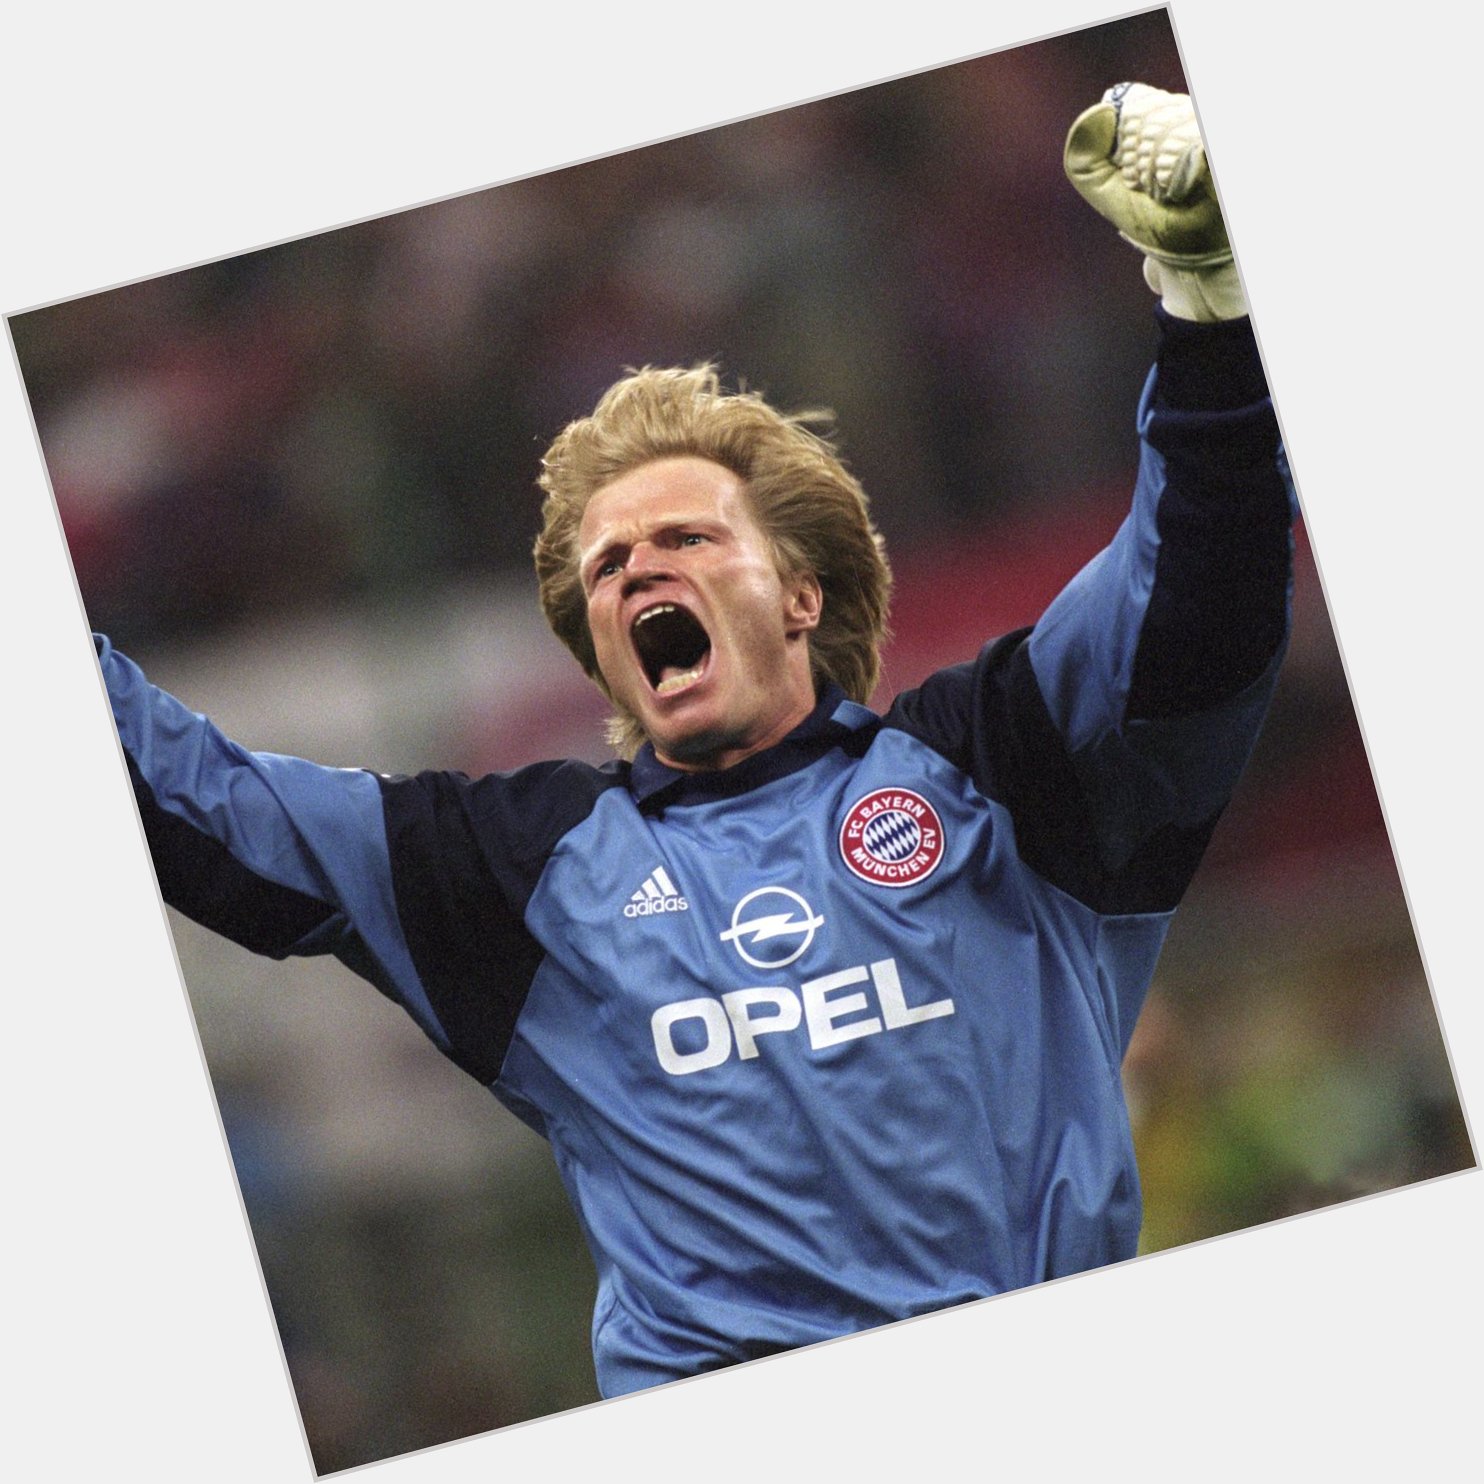 Happy Birthday Oliver Kahn.    One of the greatest goalkeepers of all time. 